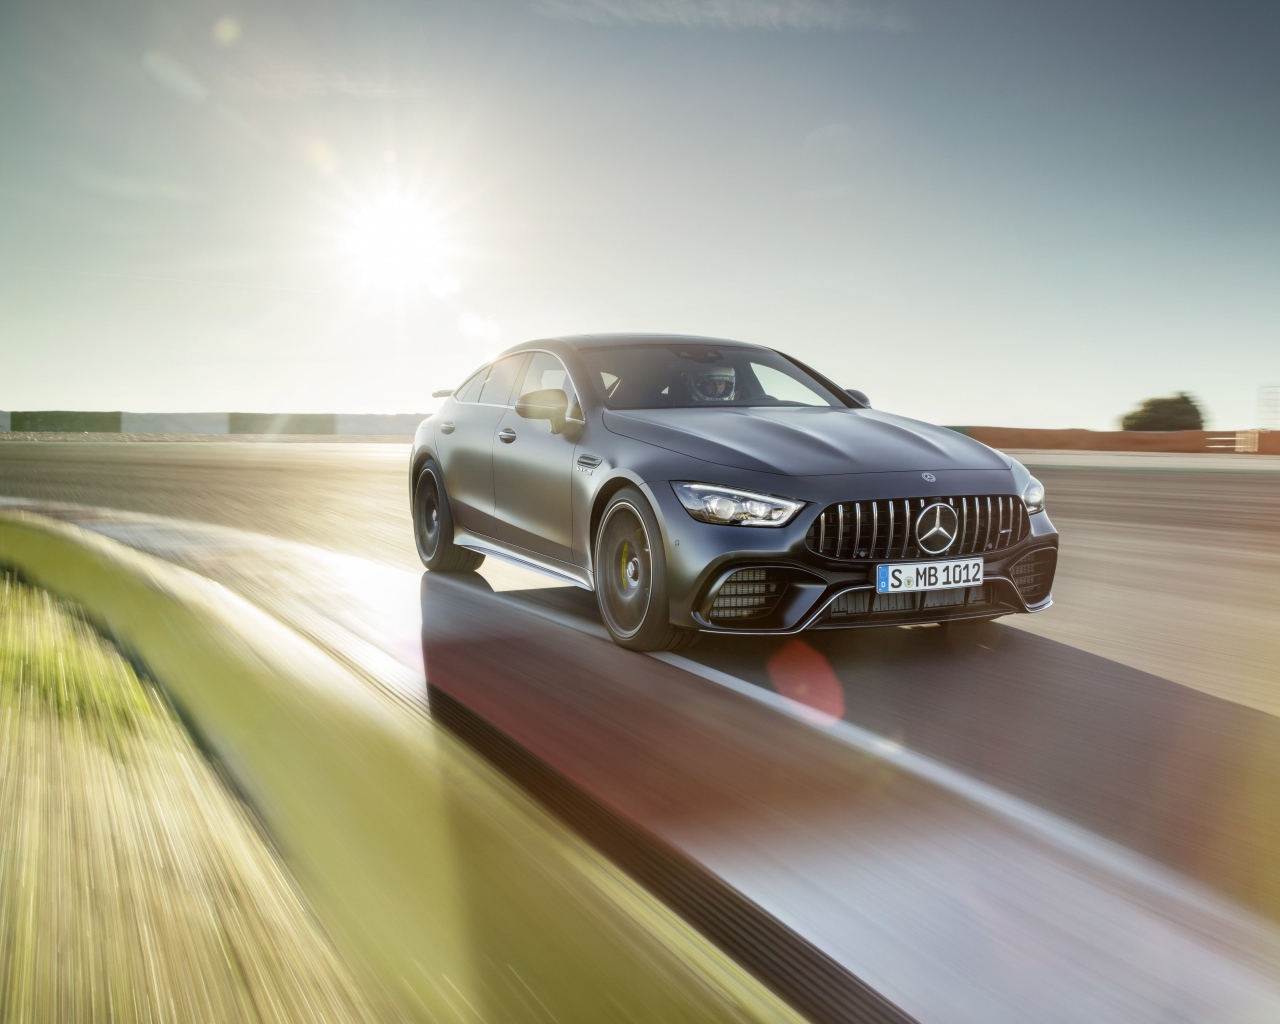 Silver car Mercedes-AMG GT4, 2018 at speed